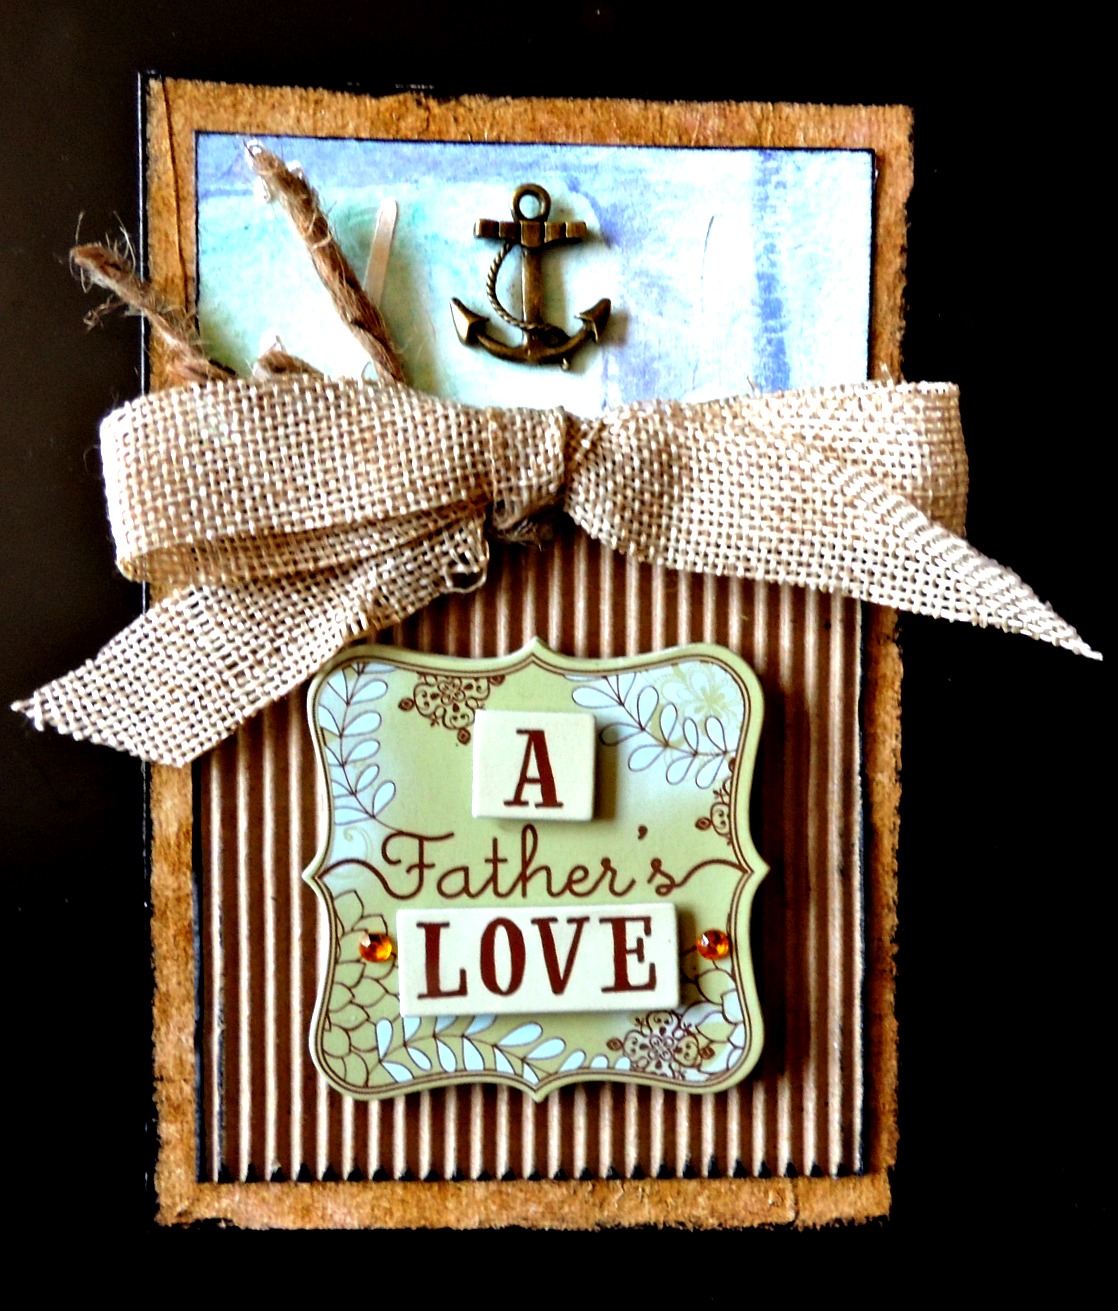 See this masculine card project with nautical theme